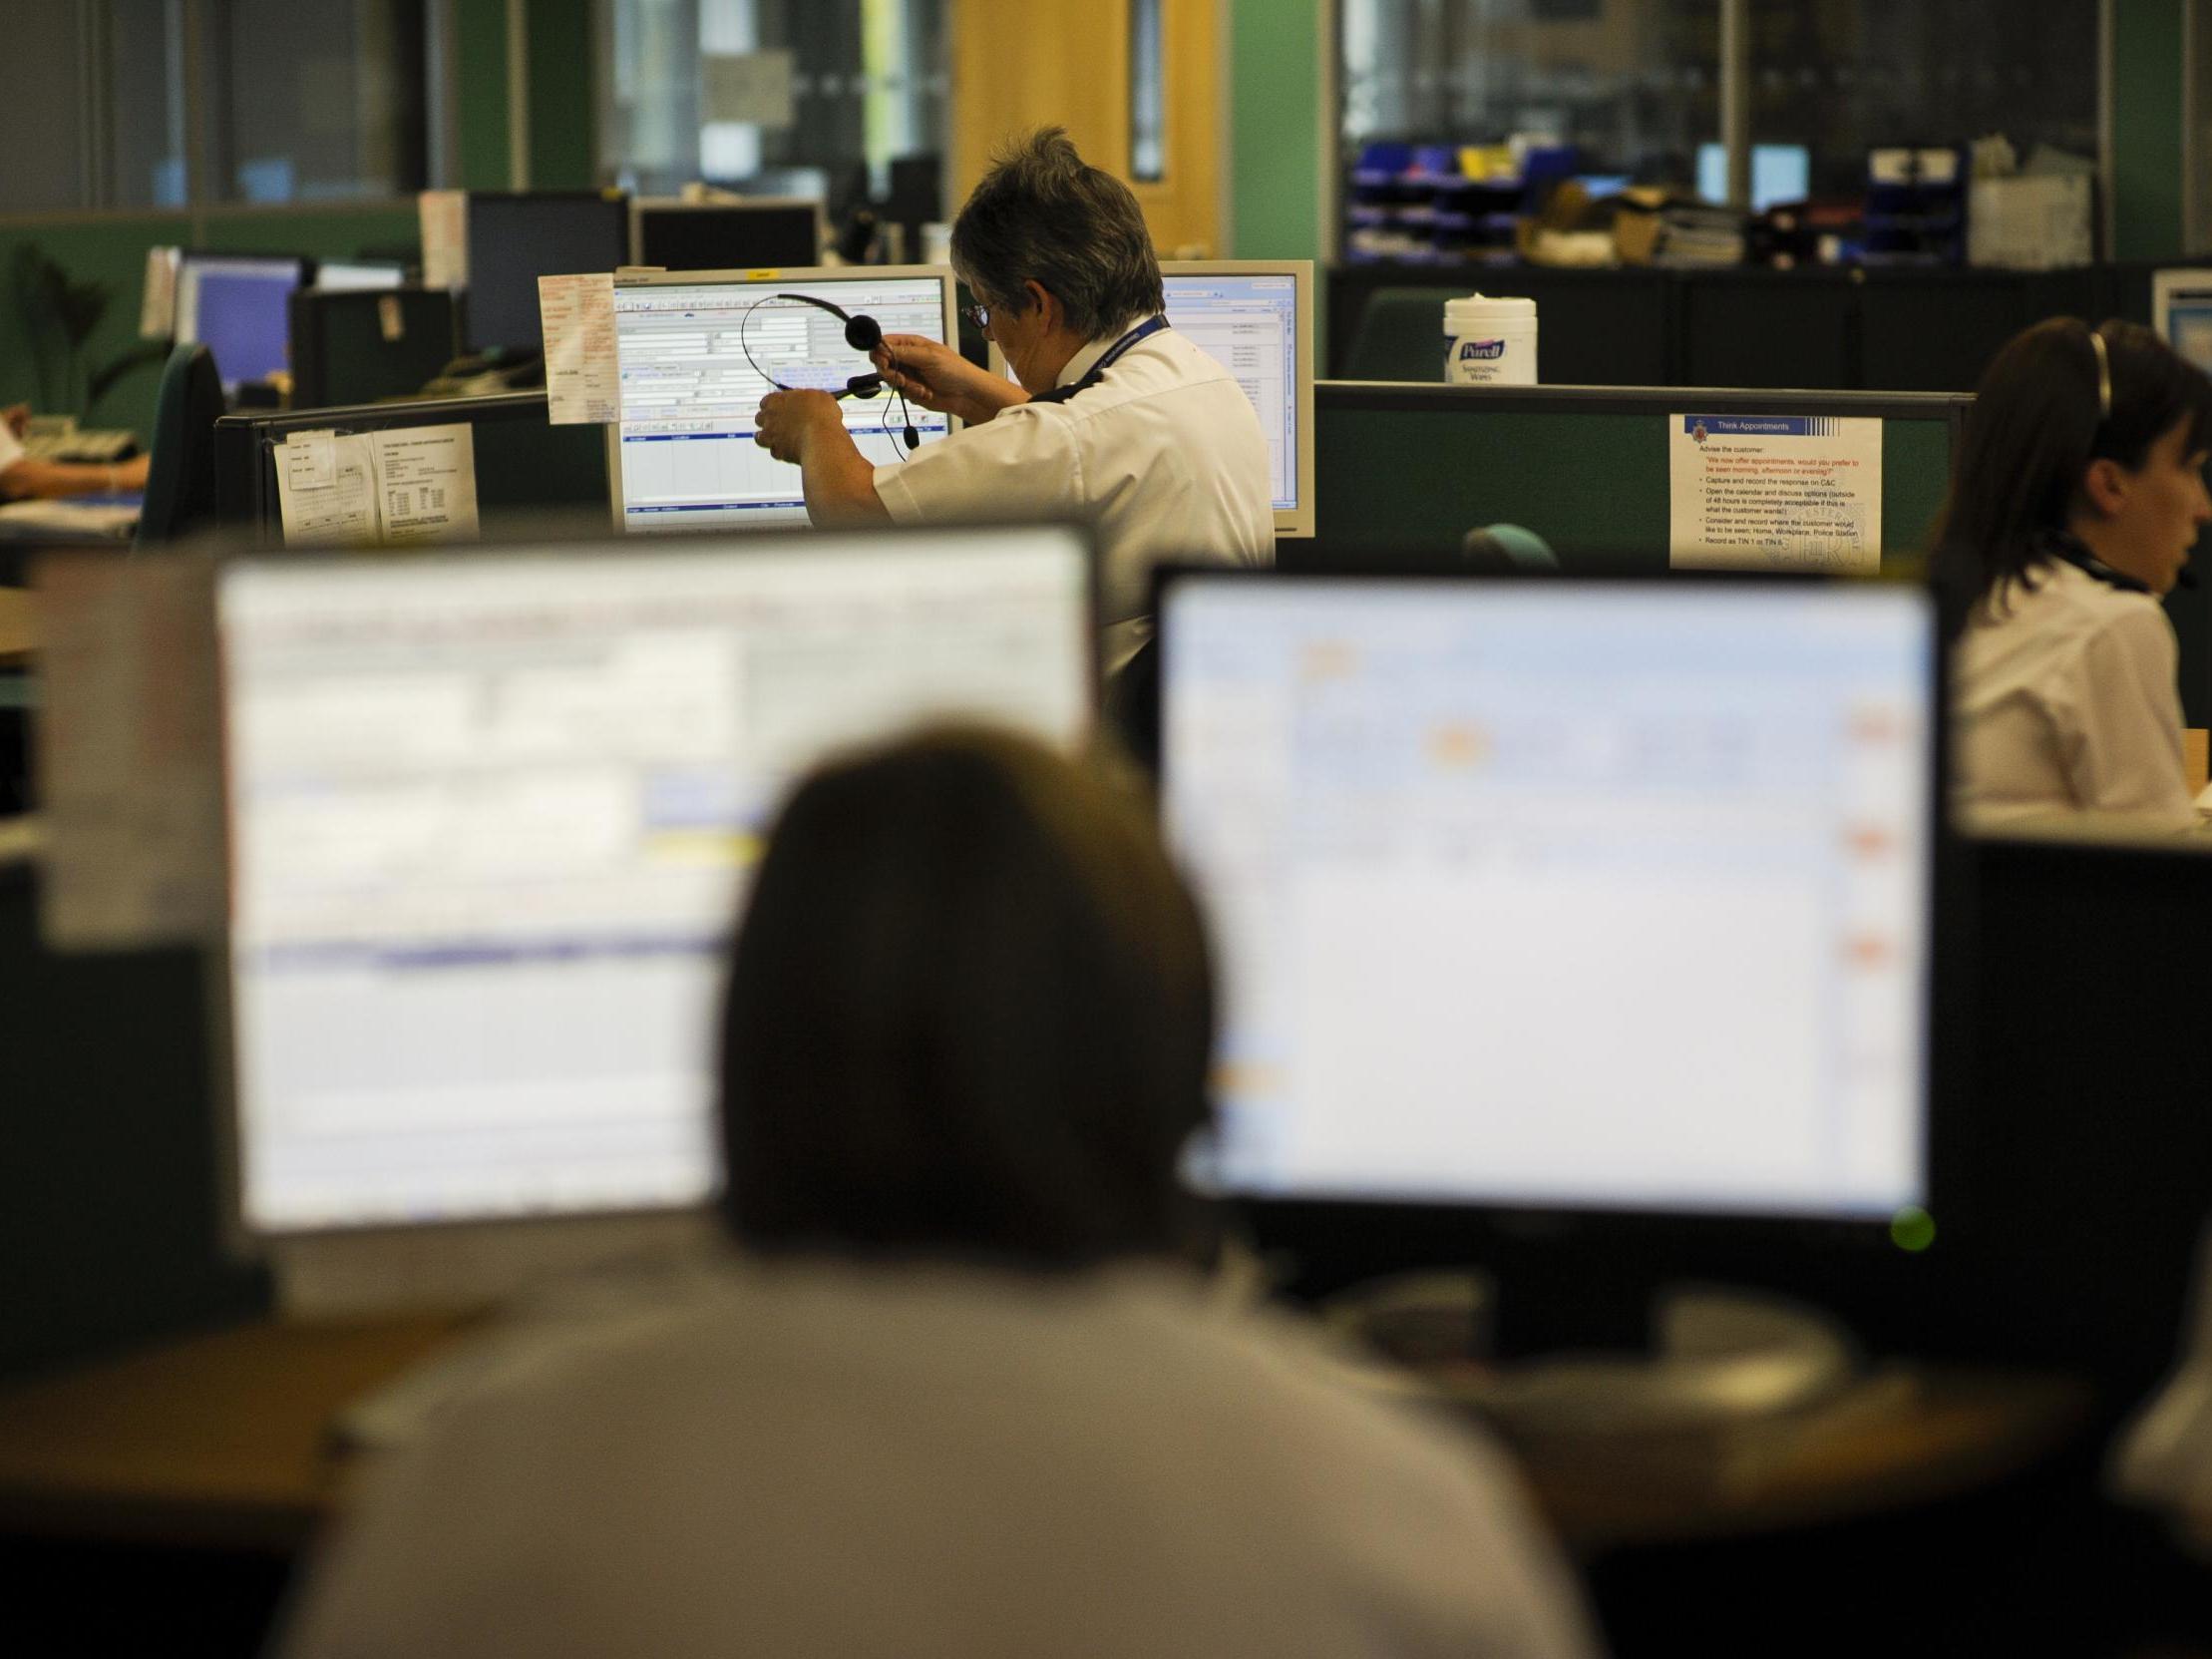 Police warned prank calls stopped call handlers dealing with genuine emergencies